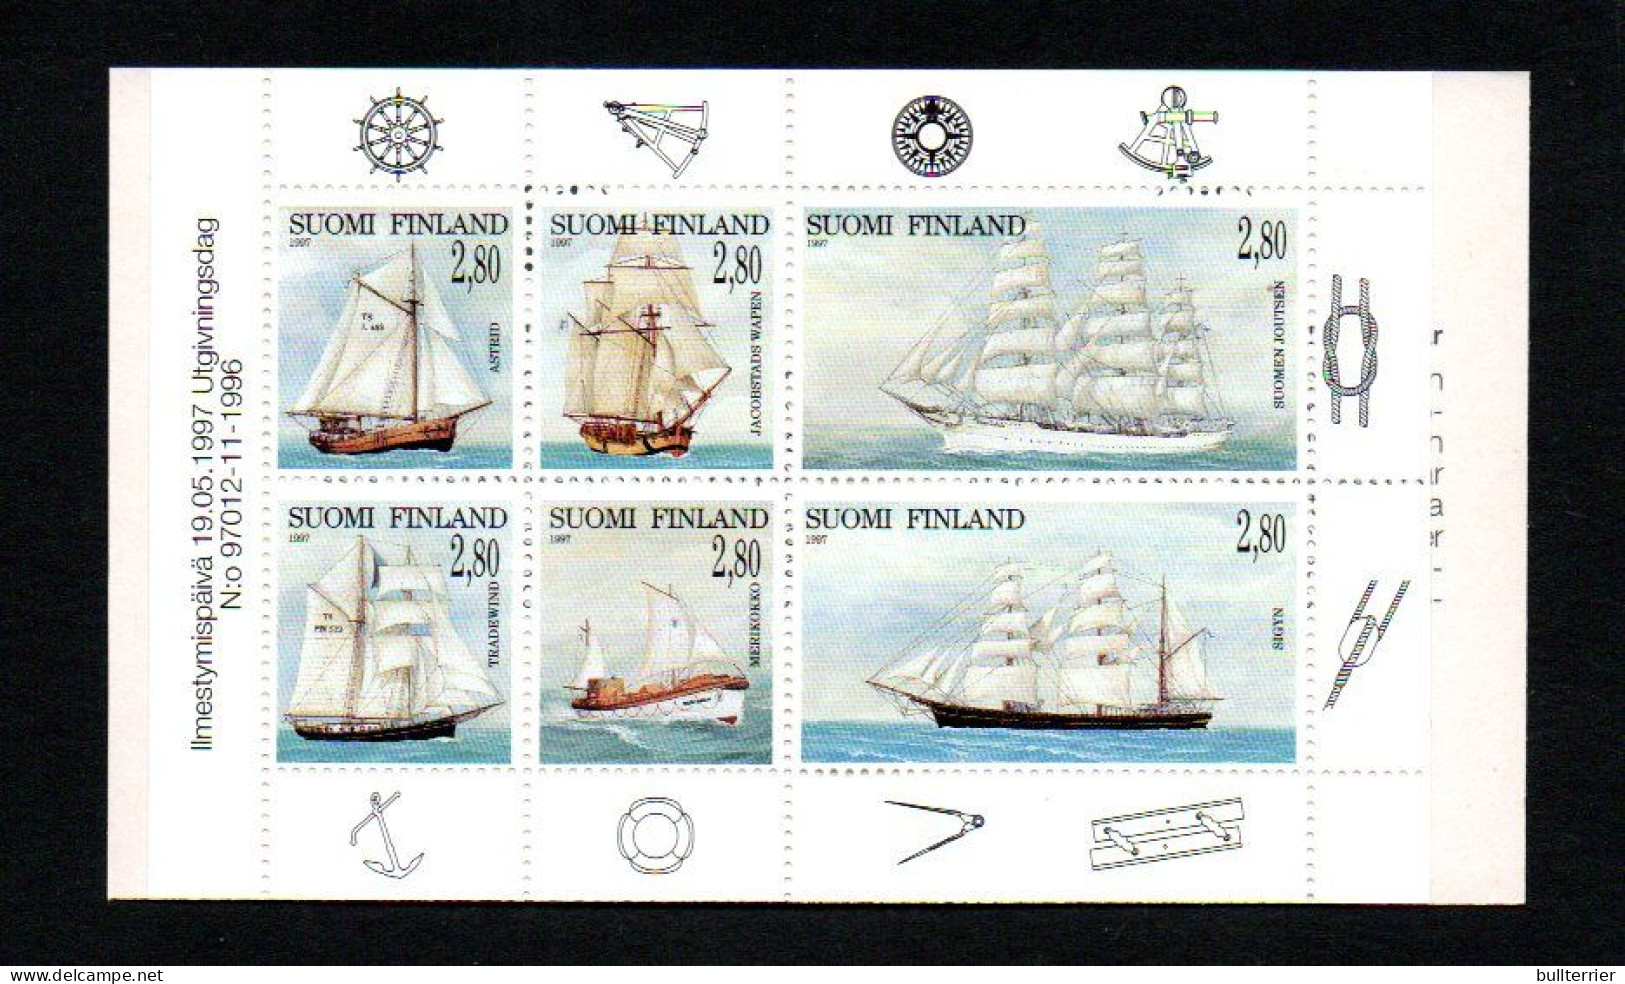 FINLAND - 1997 - Lifeboatd  Centenary Booklet Complete Mint Never Hinged, Sg Cat £21 - Booklets